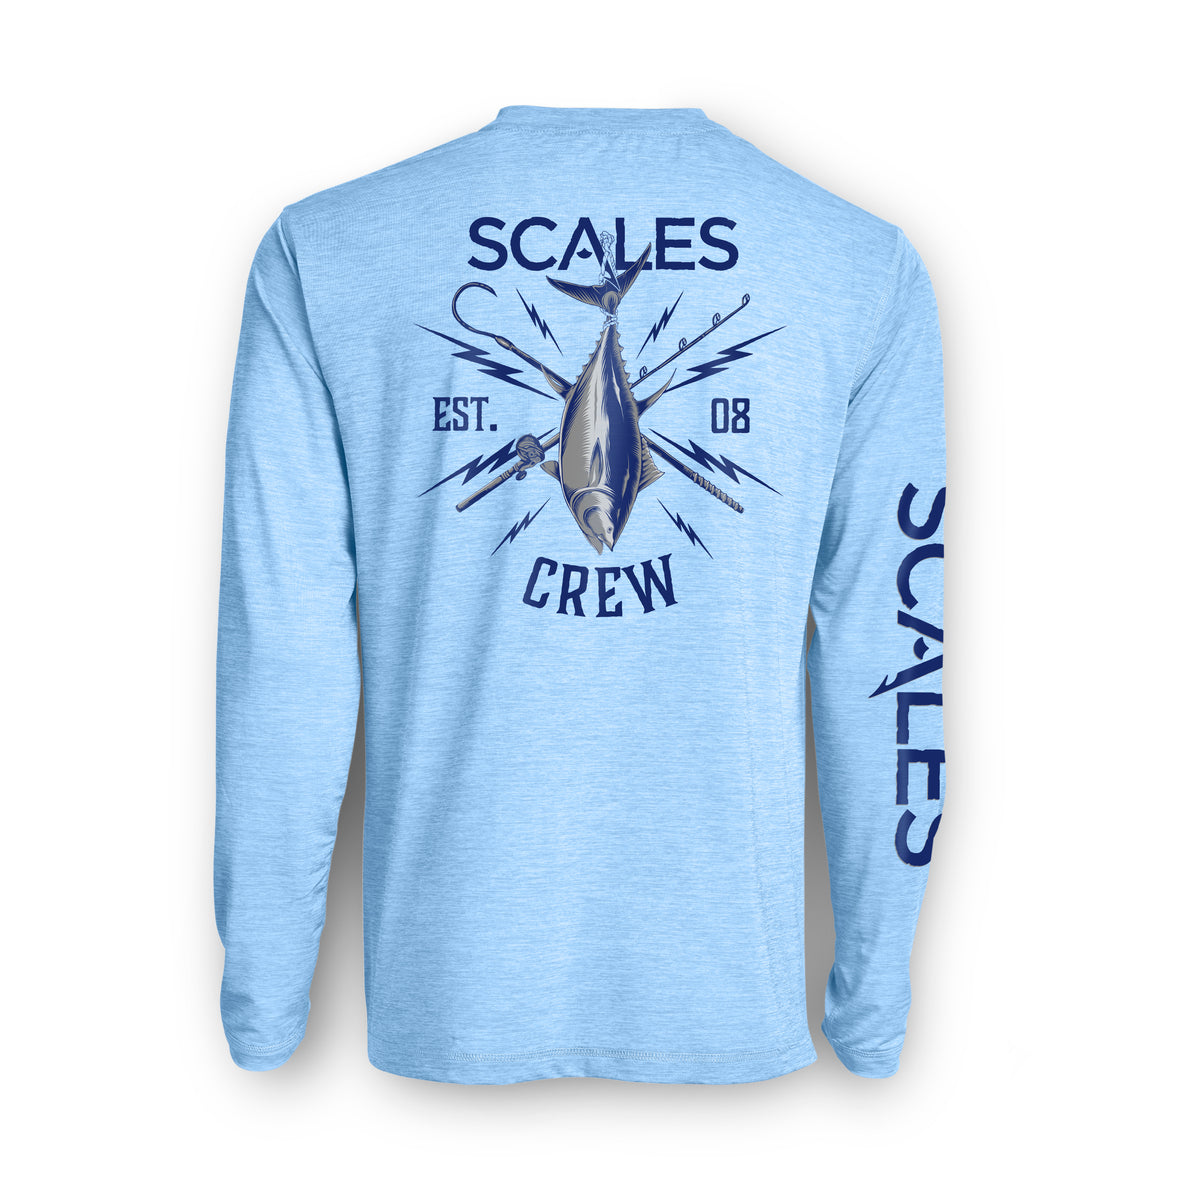 SCALES Blue Gold Active Performance Long Sleeve